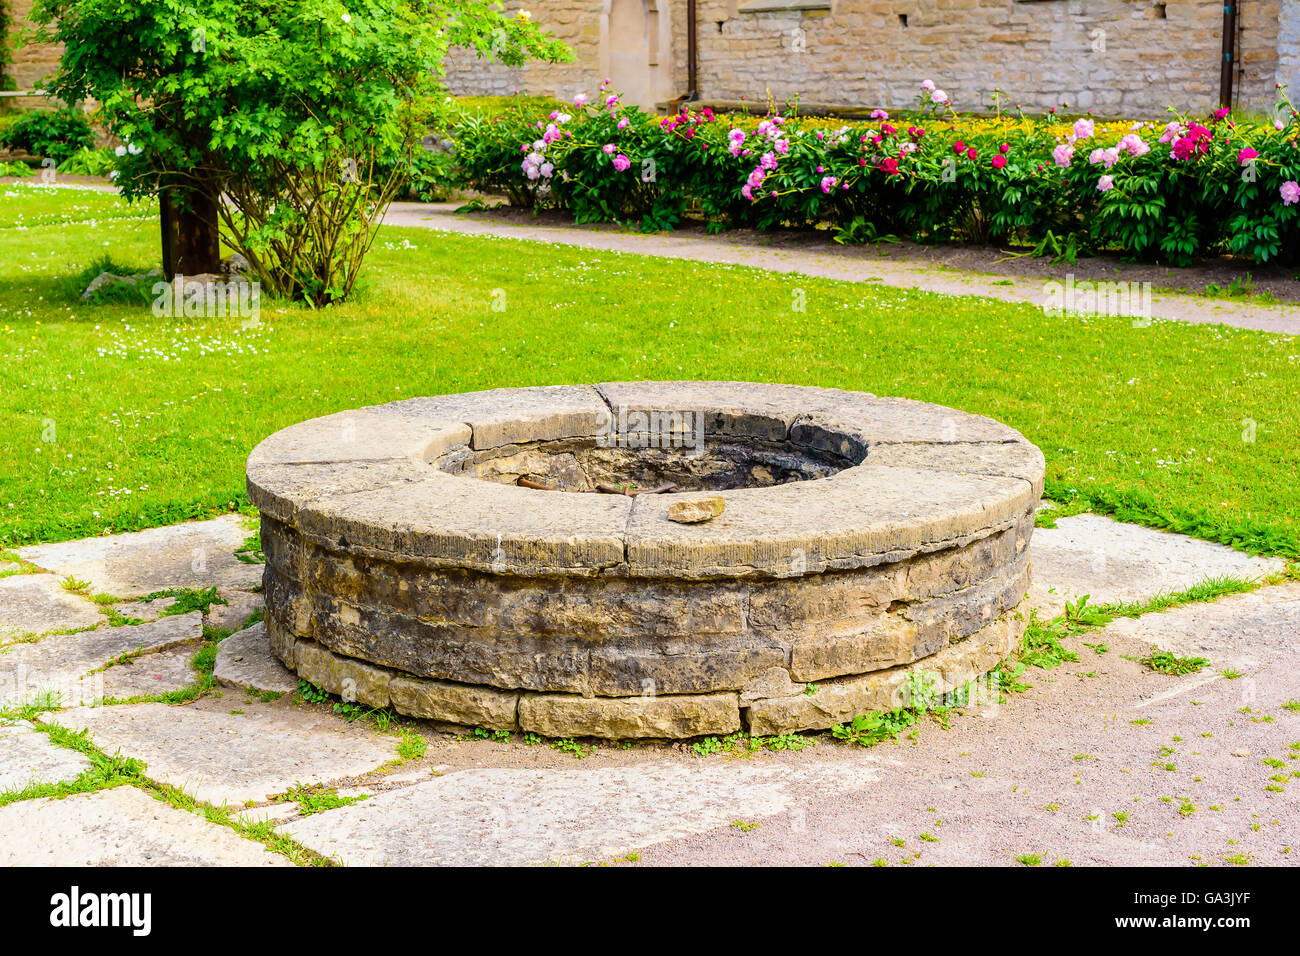 Vreta, Sweden - June 20, 2016: The old and humble well in the middle of the ancient cloister garth. Stock Photo